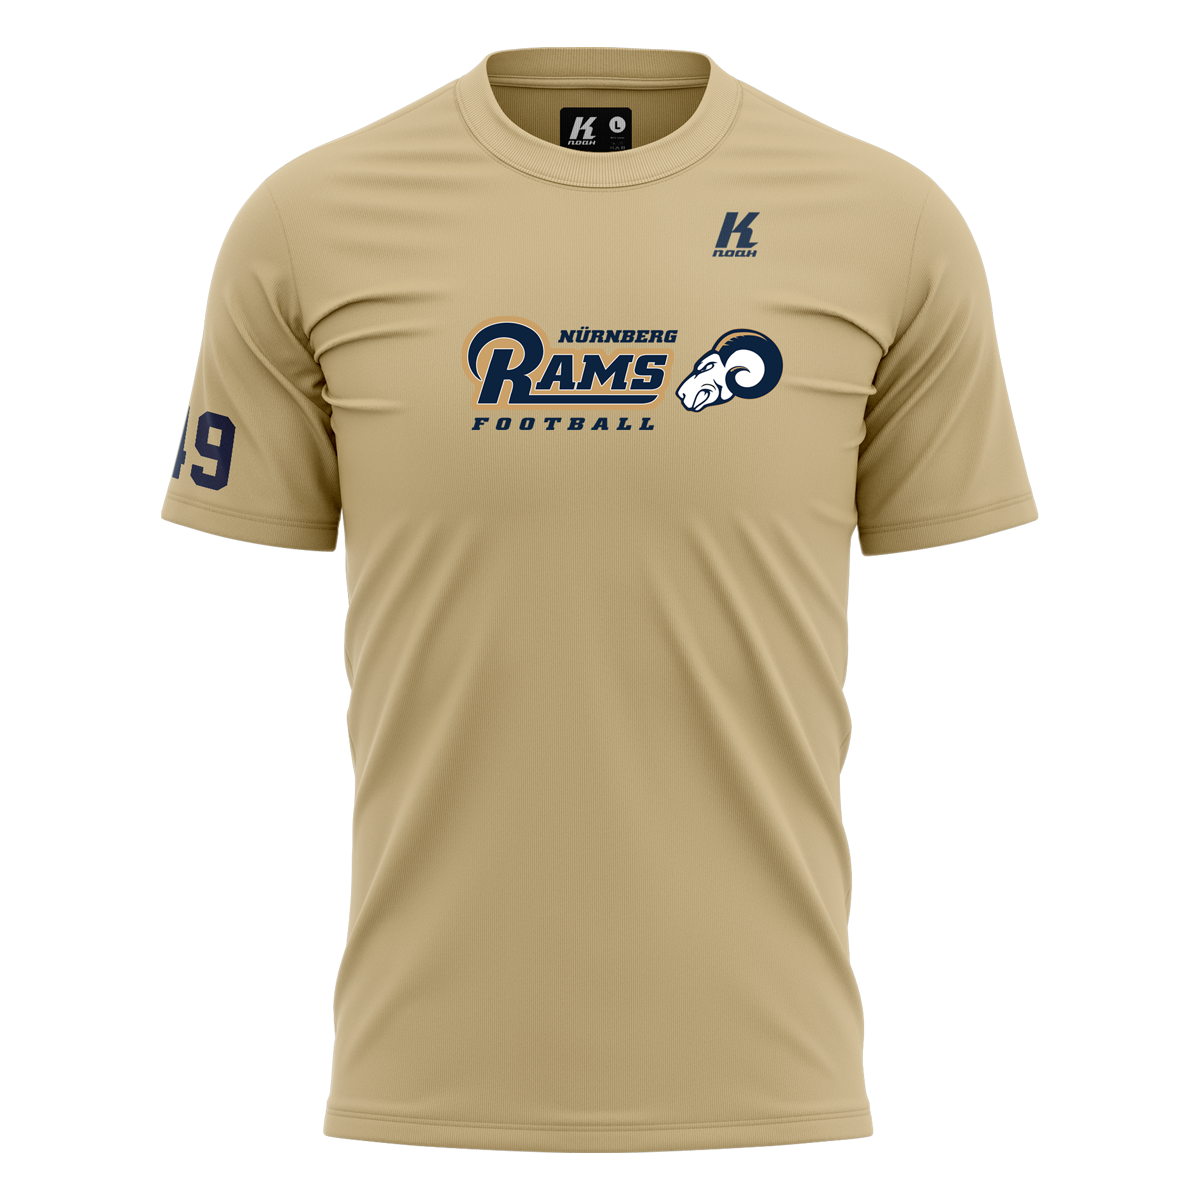 Rams Basic Tee Essential Sand with Playernumber/Initials